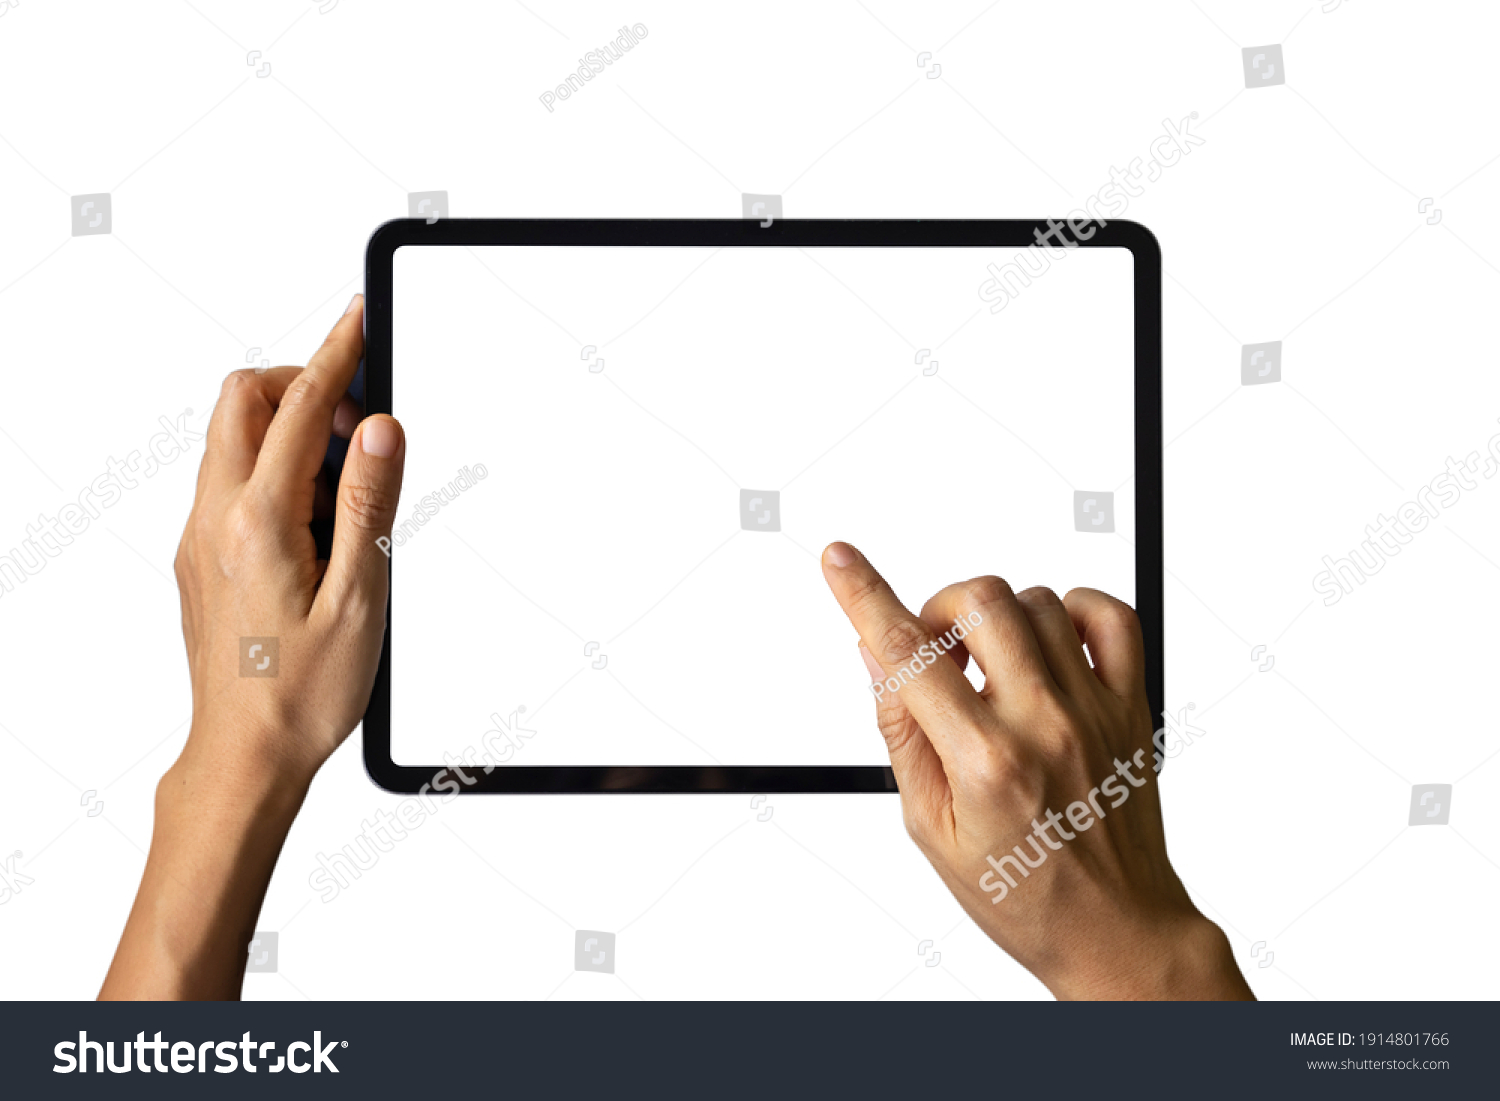 Close-up woman of Left hand held, right hand use finger touches with digital tablet white screen isolated on white background. Concept of technology, connection, communication, social. #1914801766